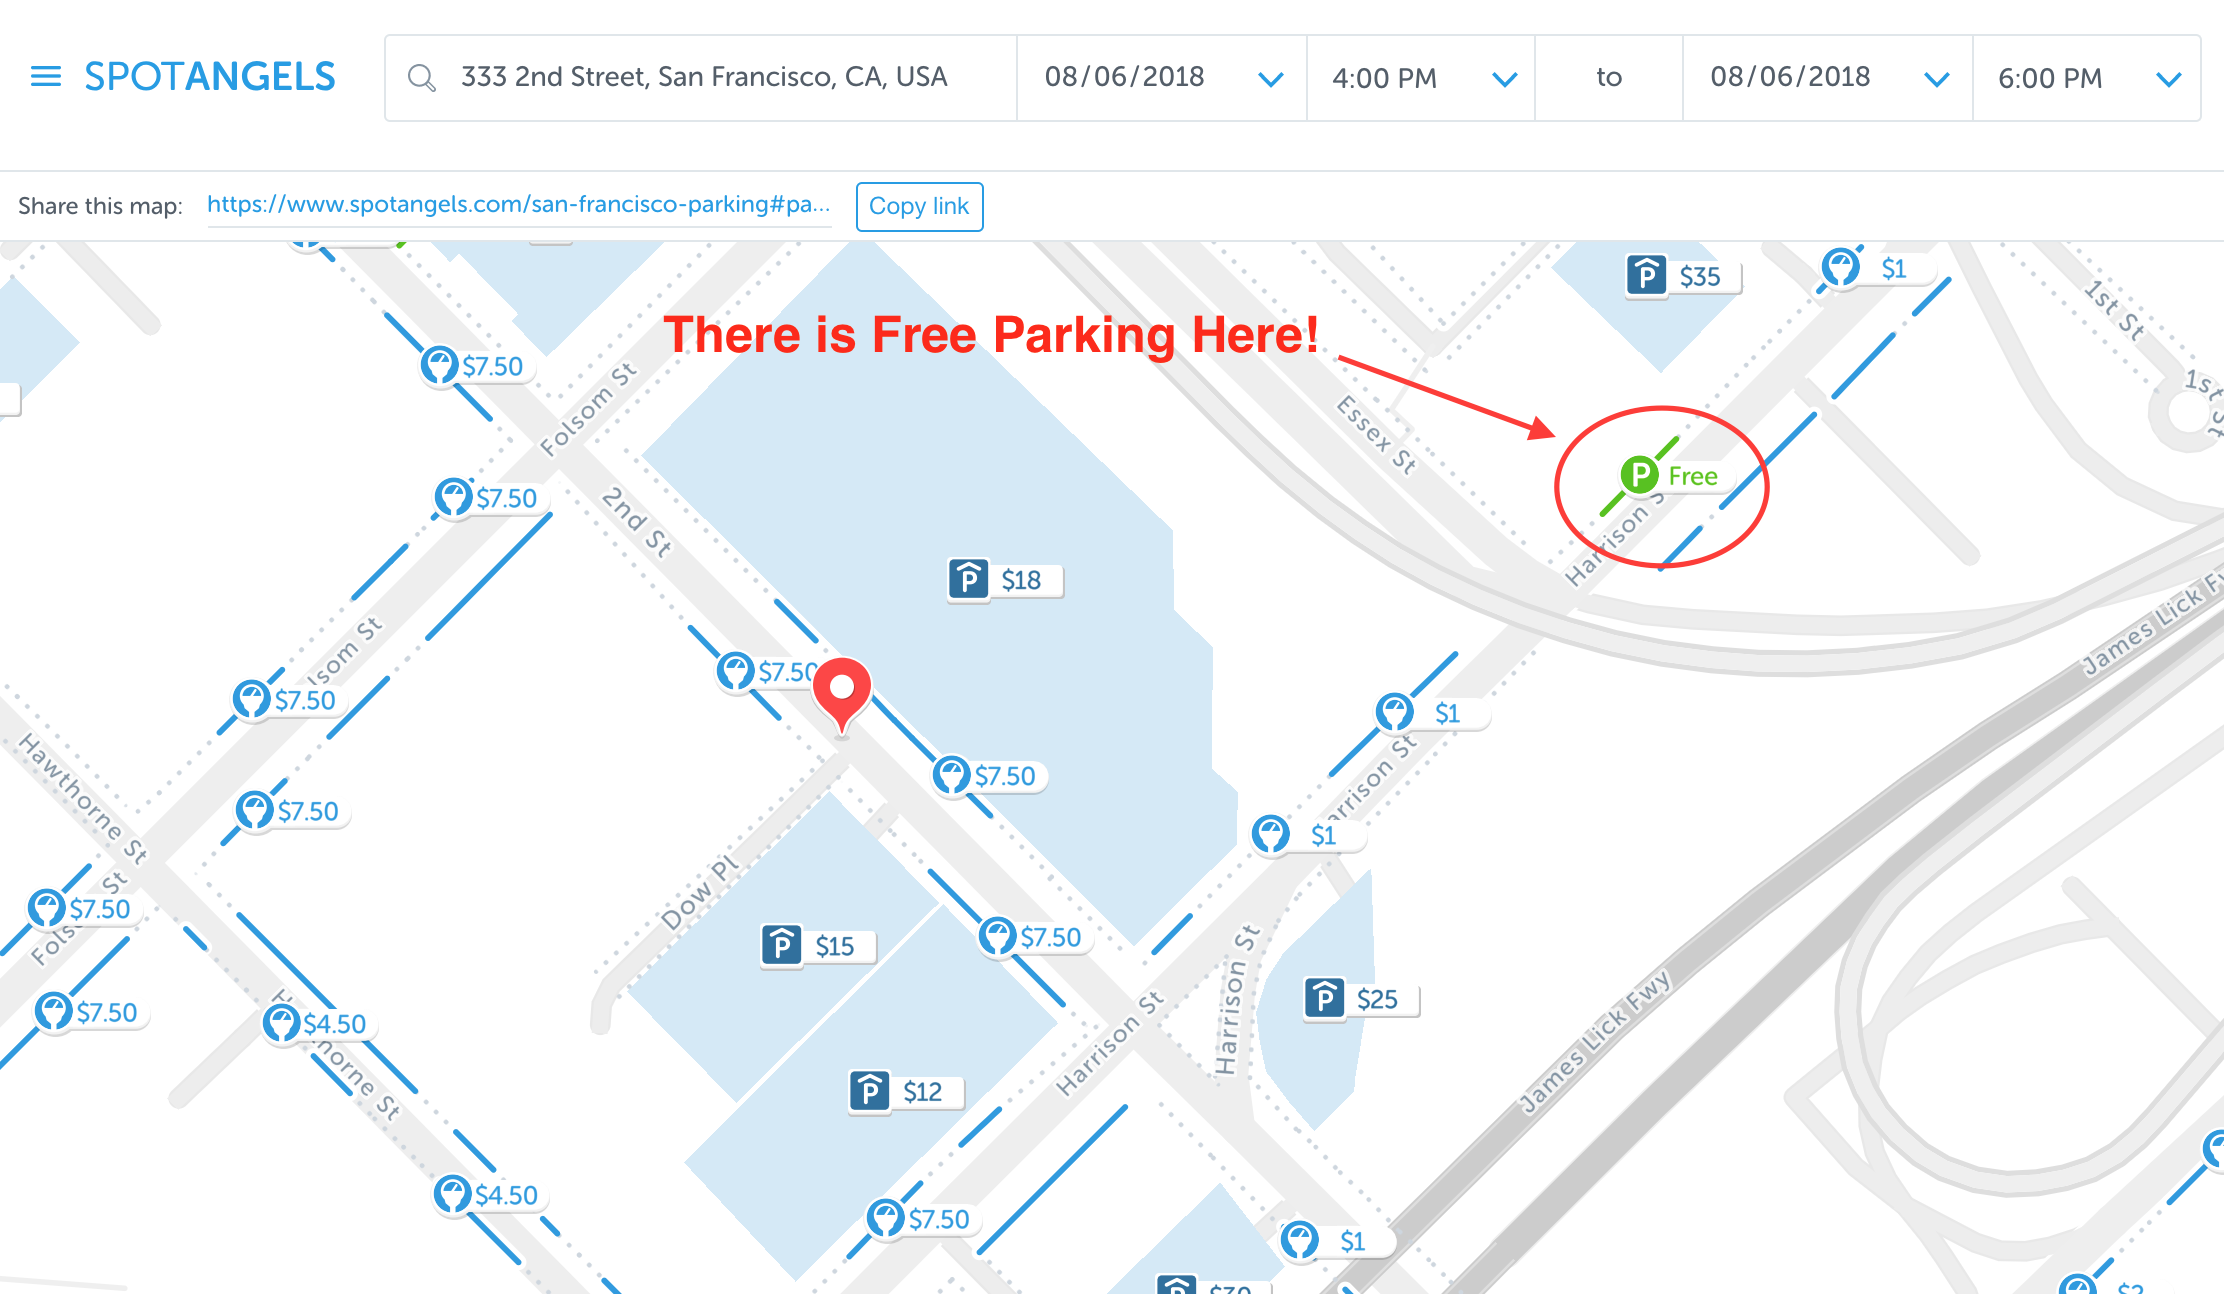 Map of Free Parking in San Francisco